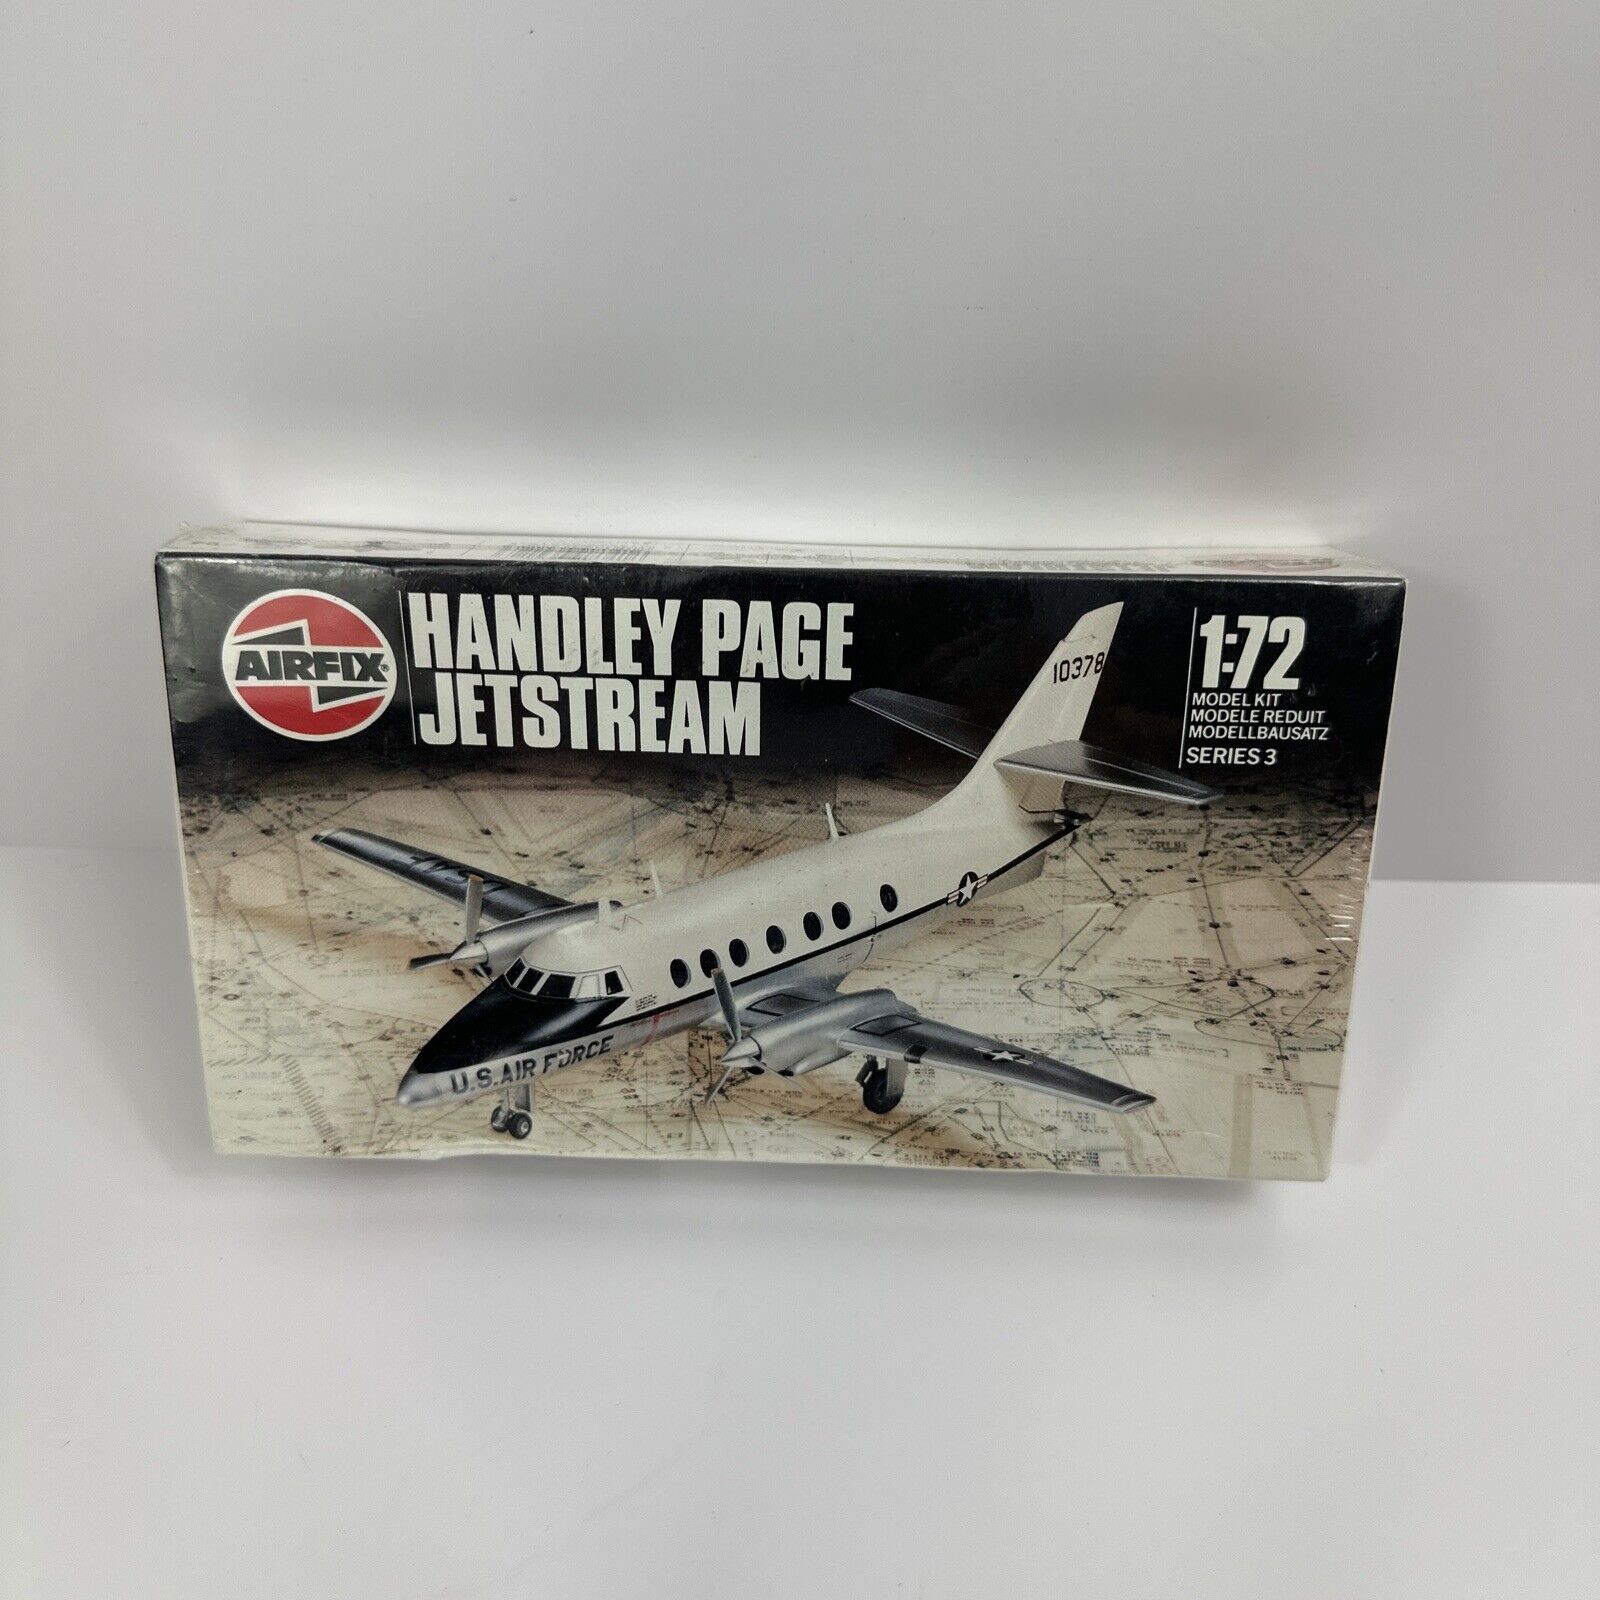 Airfix Handley Page Jetstream Model Kit, 1:72 scale, Factory Sealed